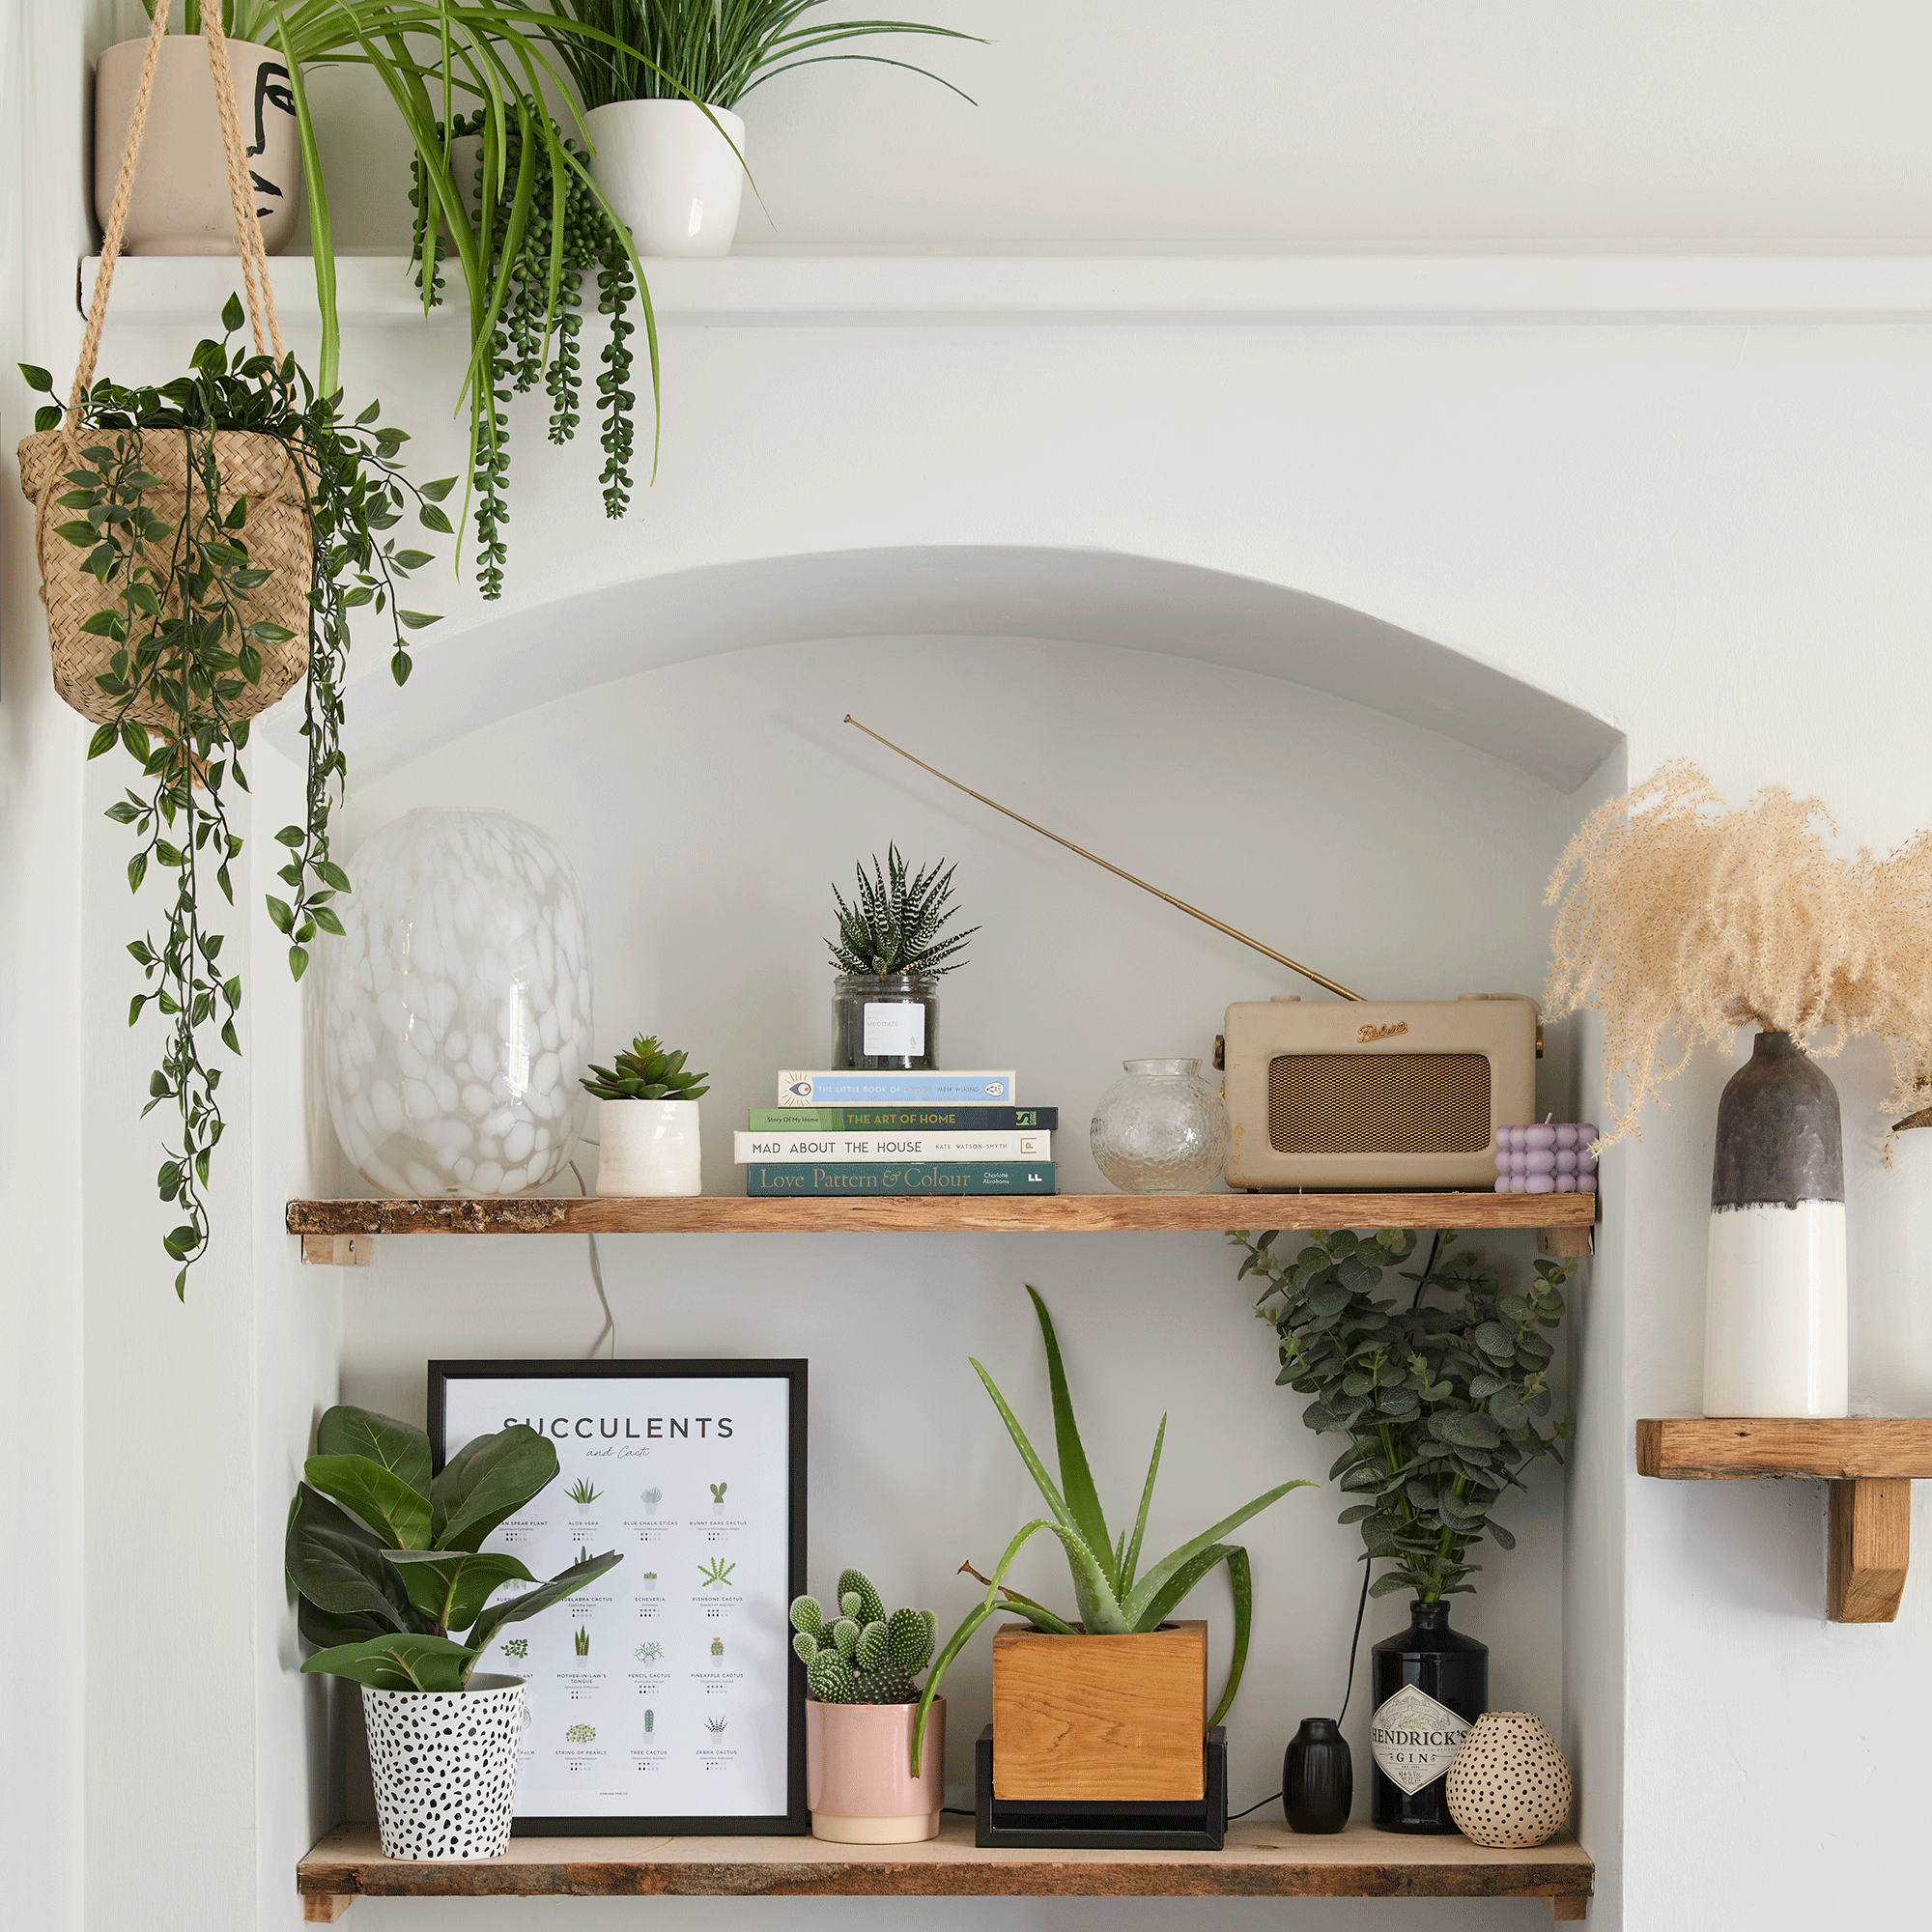 How to organise living room shelves – 10 ways to create a beautifully ordered display